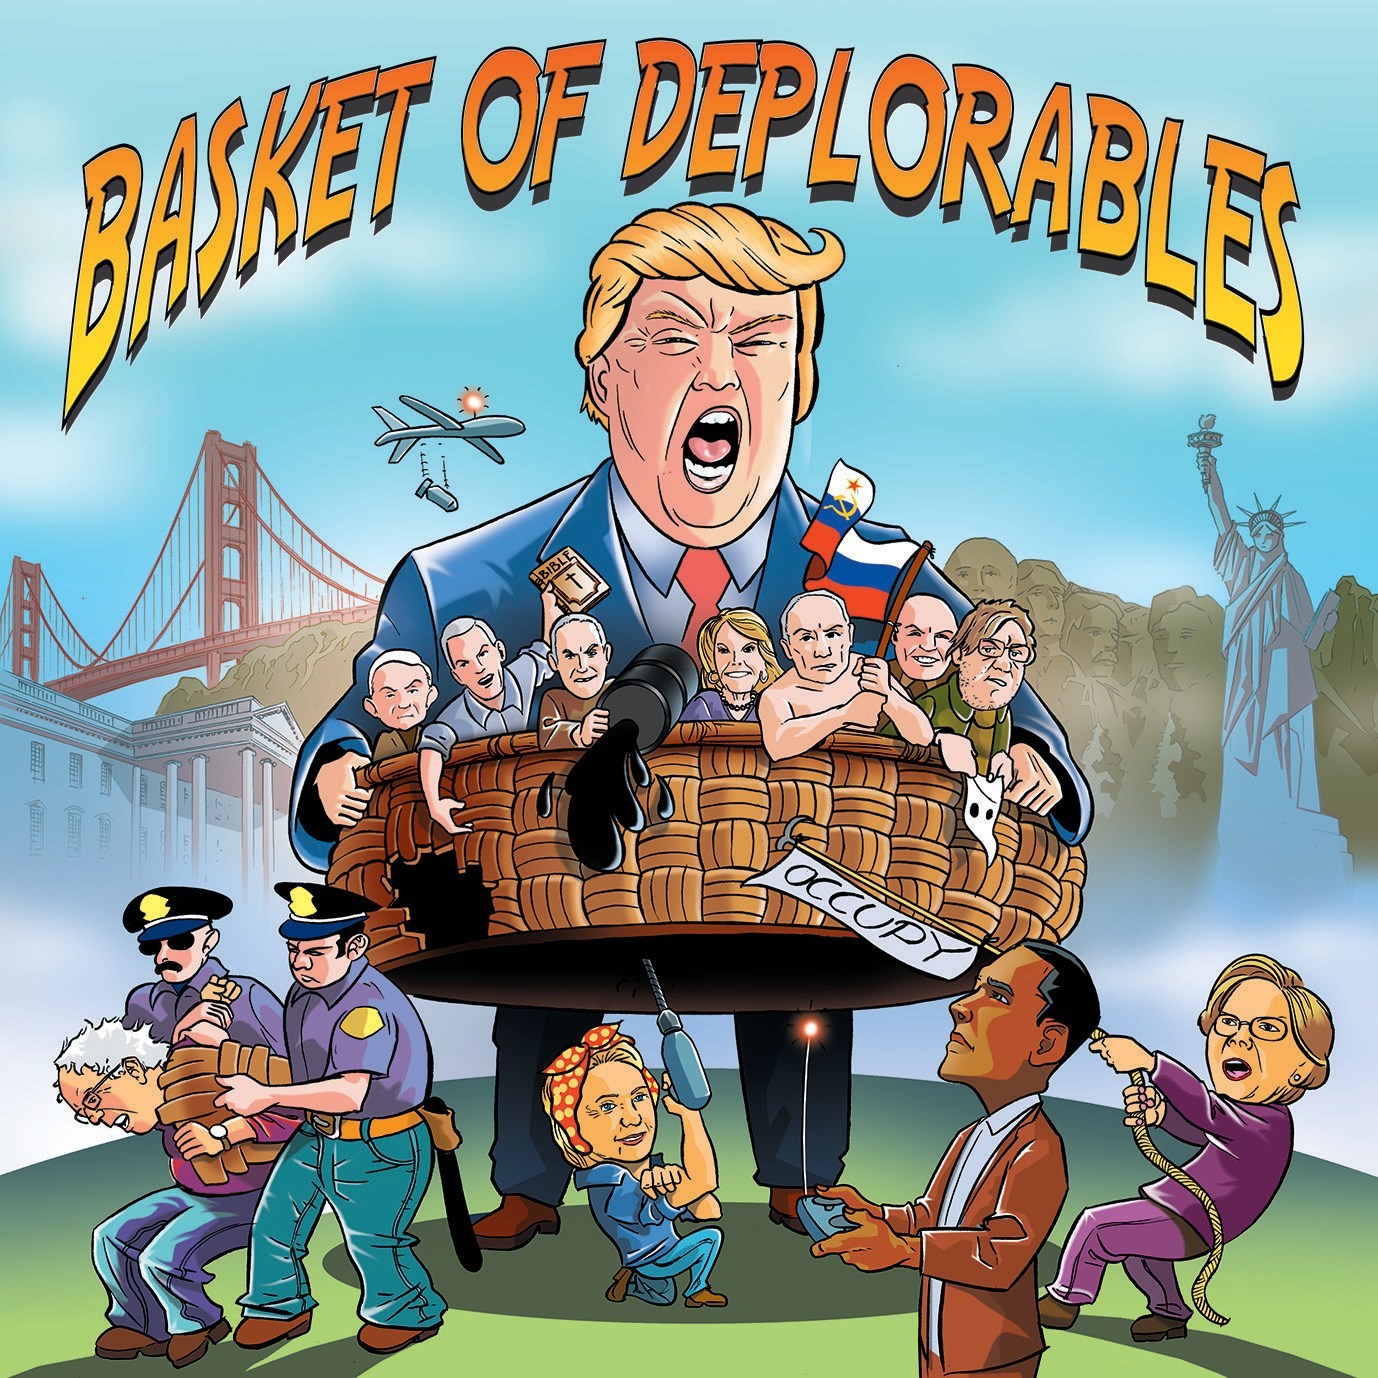 Basketcase, Inc. Launches Kickstarter Campaign for Basket of Deplorables -  the Board Game!